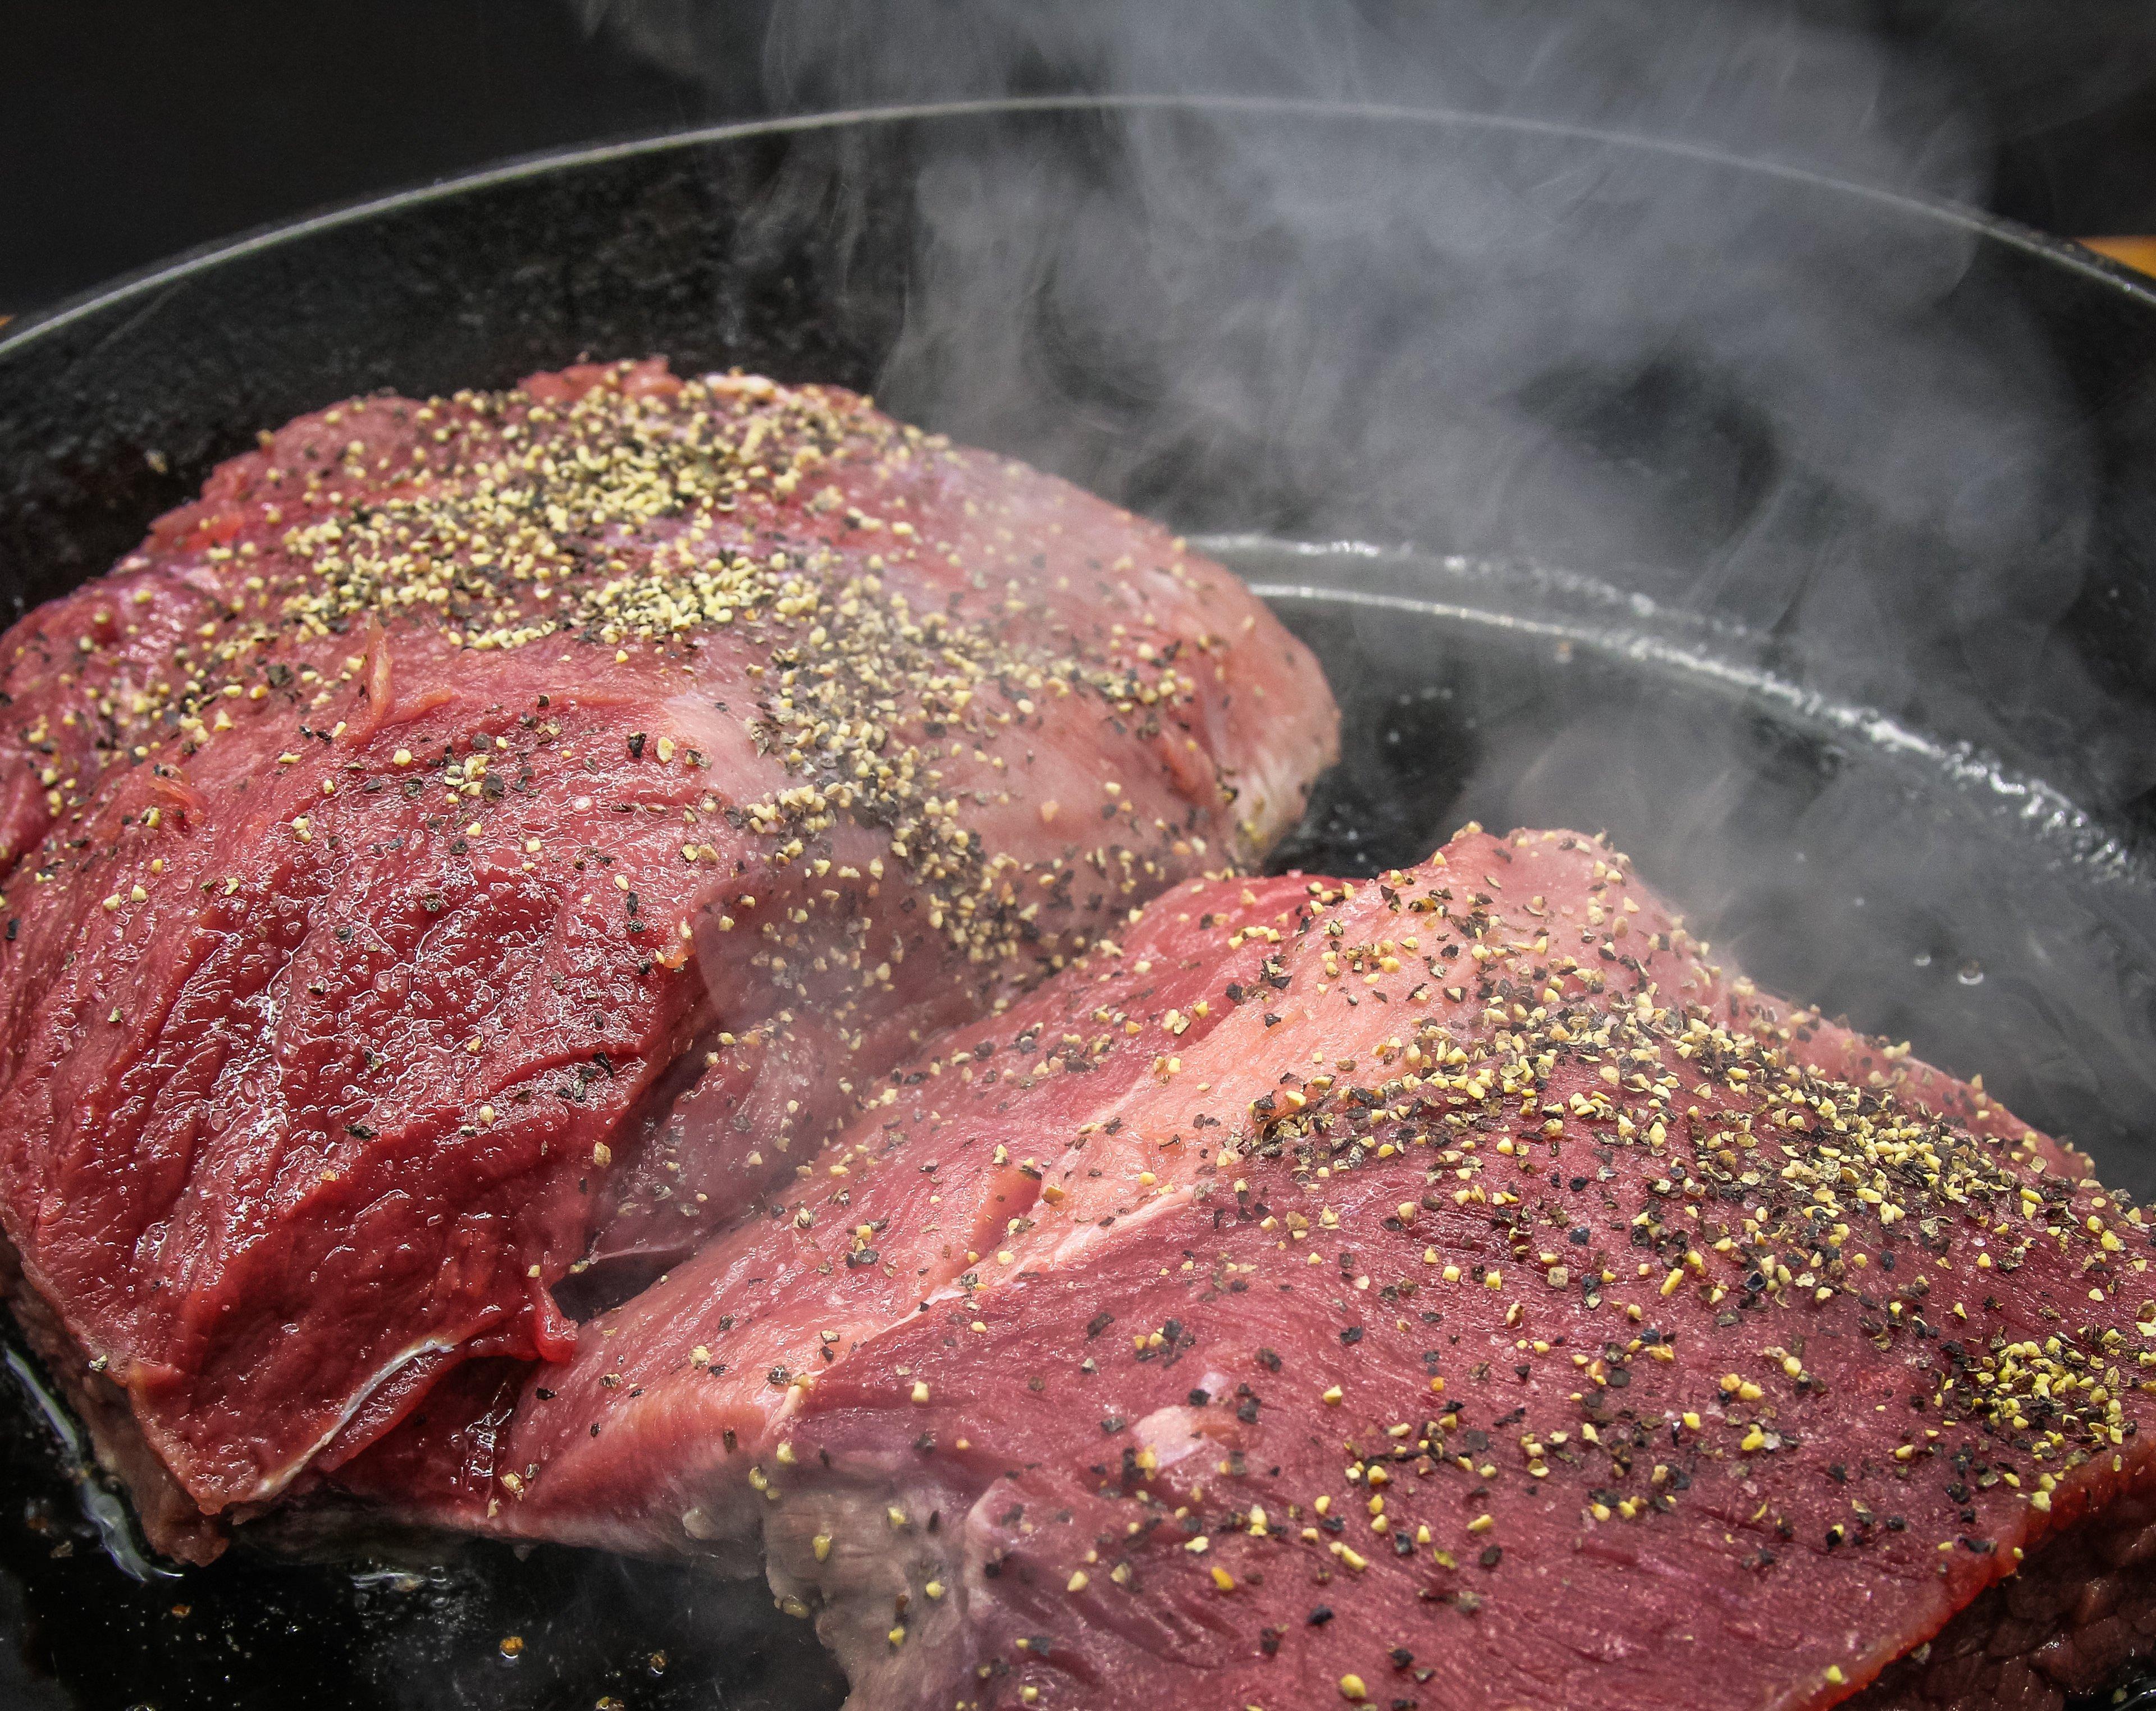 Pan-sear the venison roast before adding it to the slow cooker for extra flavor.